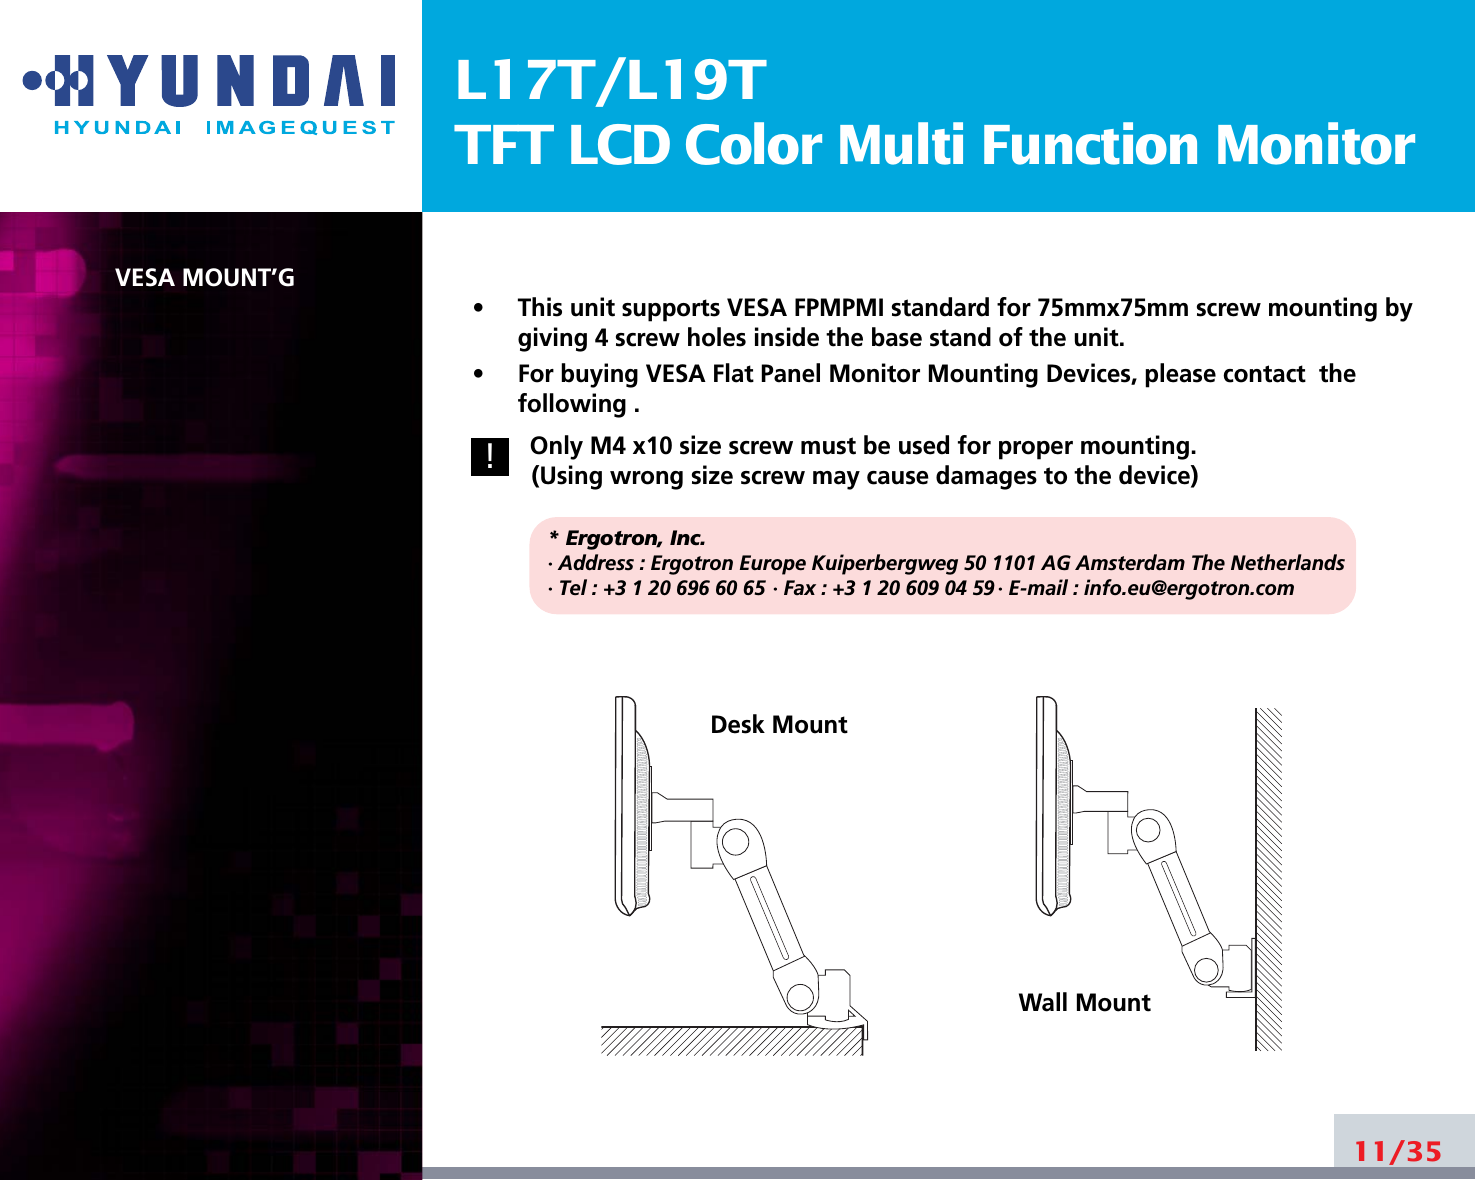 L17T/L19TTFT LCD Color Multi Function MonitorVESA MOUNT’G•     This unit supports VESA FPMPMI standard for 75mmx75mm screw mounting bygiving 4 screw holes inside the base stand of the unit.•     For buying VESA Flat Panel Monitor Mounting Devices, please contact  thefollowing .Only M4 x10 size screw must be used for proper mounting.(Using wrong size screw may cause damages to the device)* Ergotron, Inc.· Address : Ergotron Europe Kuiperbergweg 50 1101 AG Amsterdam The Netherlands· Tel : +3 1 20 696 60 65 · Fax : +3 1 20 609 04 59 · E-mail : info.eu@ergotron.com11/35Desk MountWall Mount!